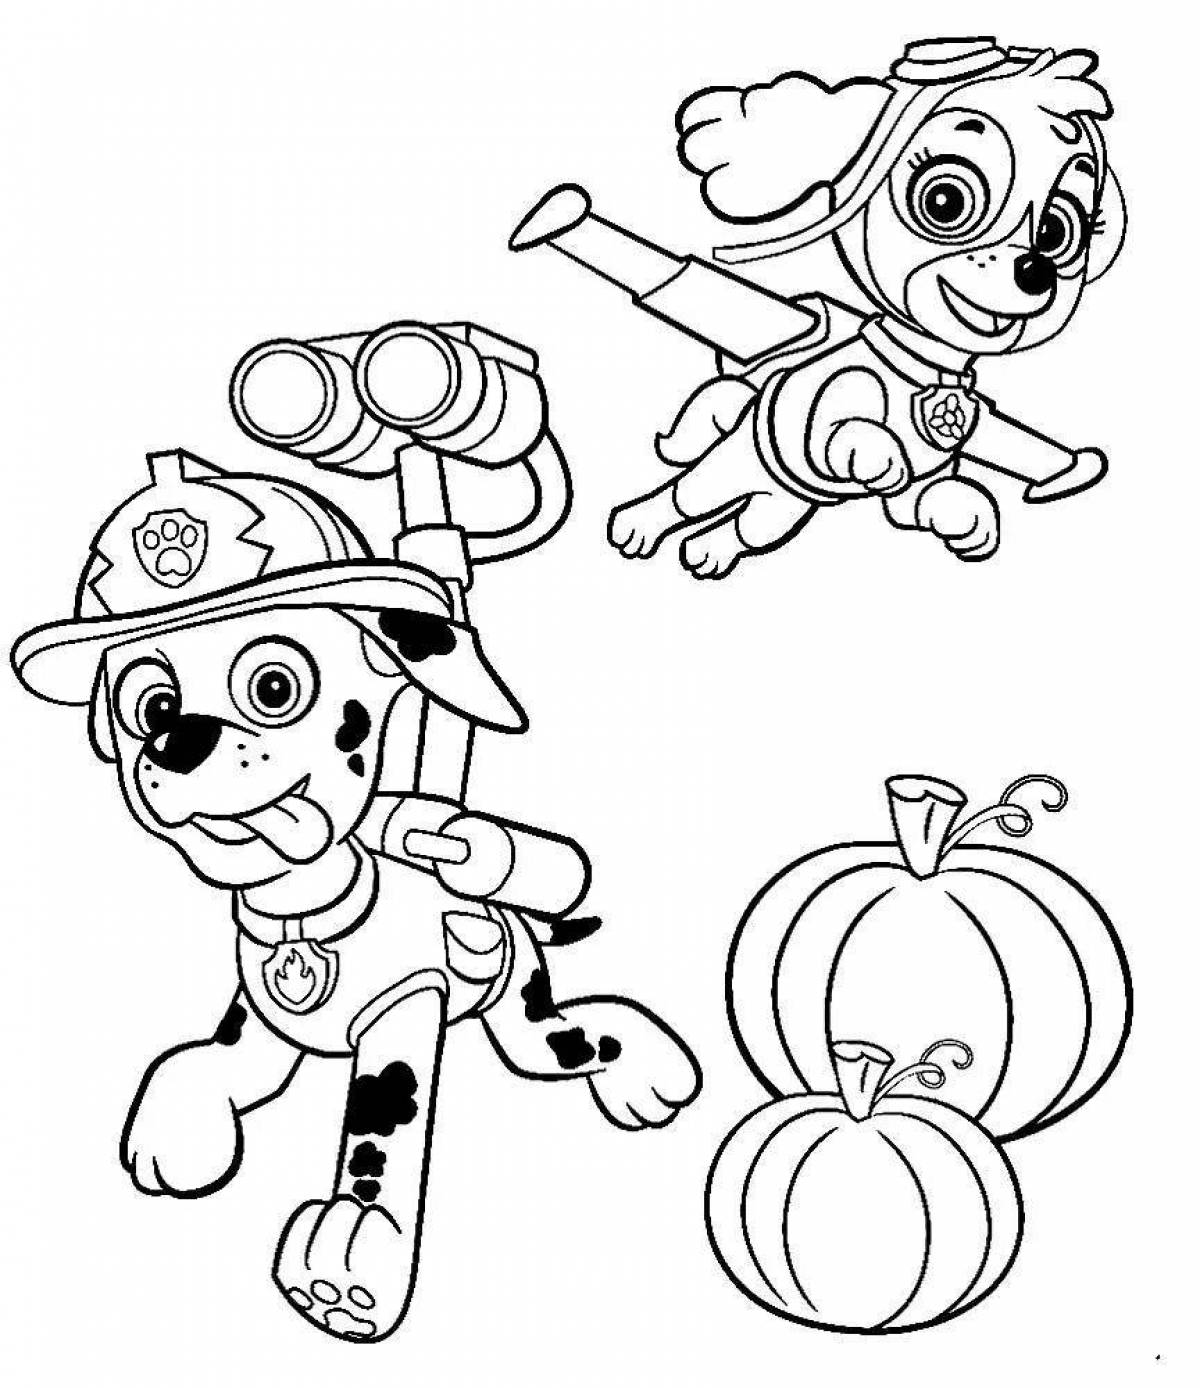 Adorable marshal coloring book for kids